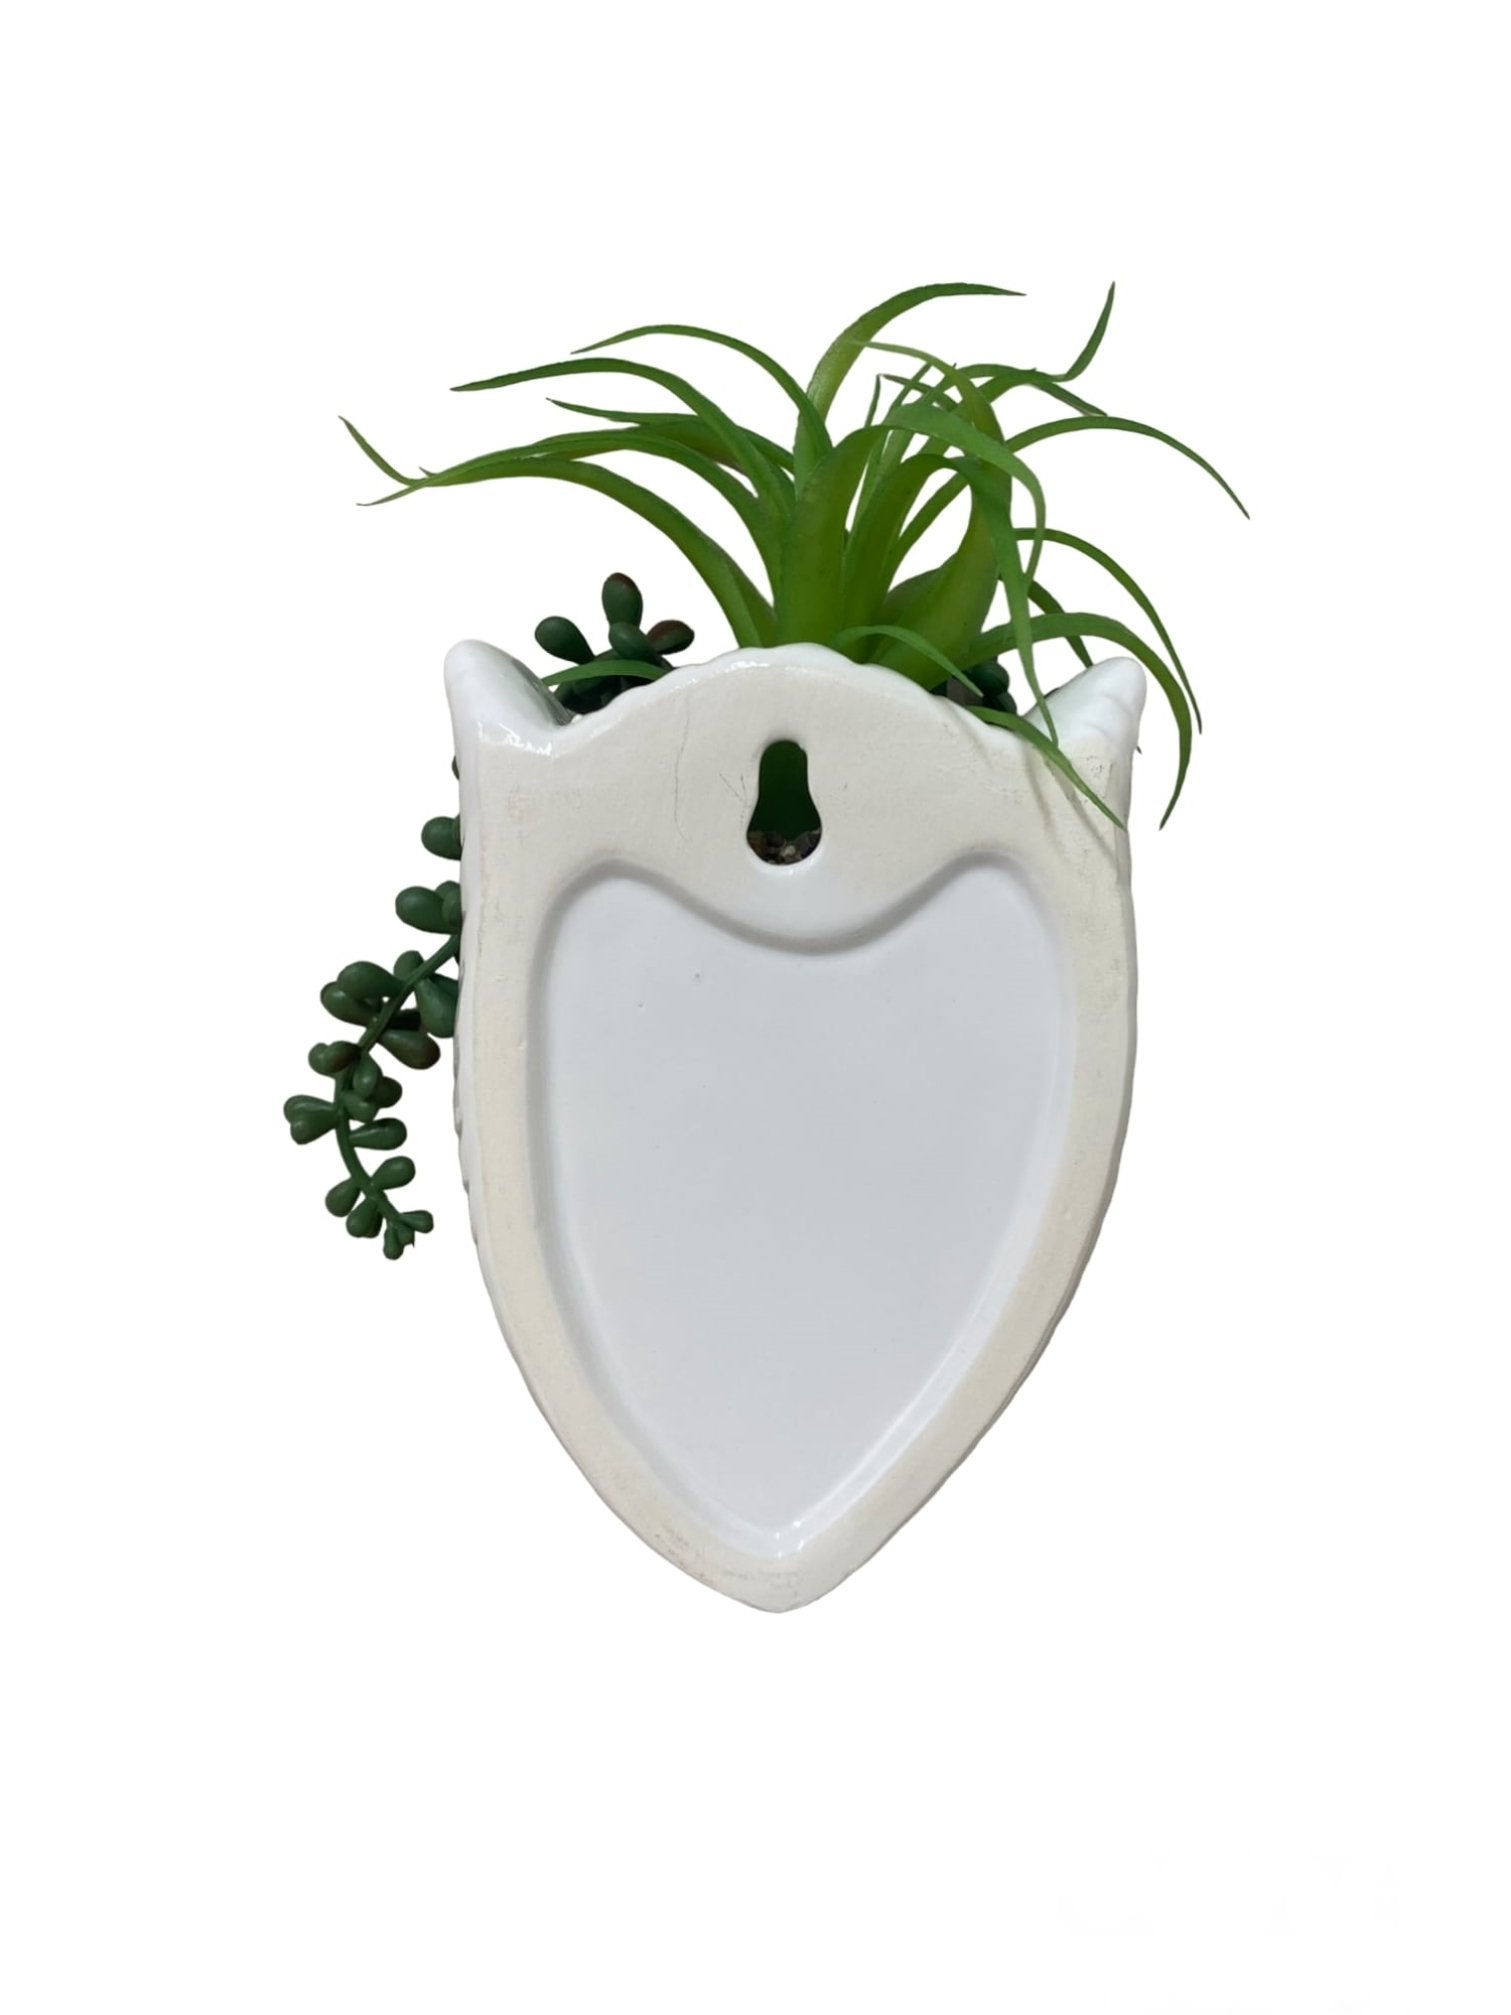 Faux Succulents in Wall Planter - a Cheeky Plant